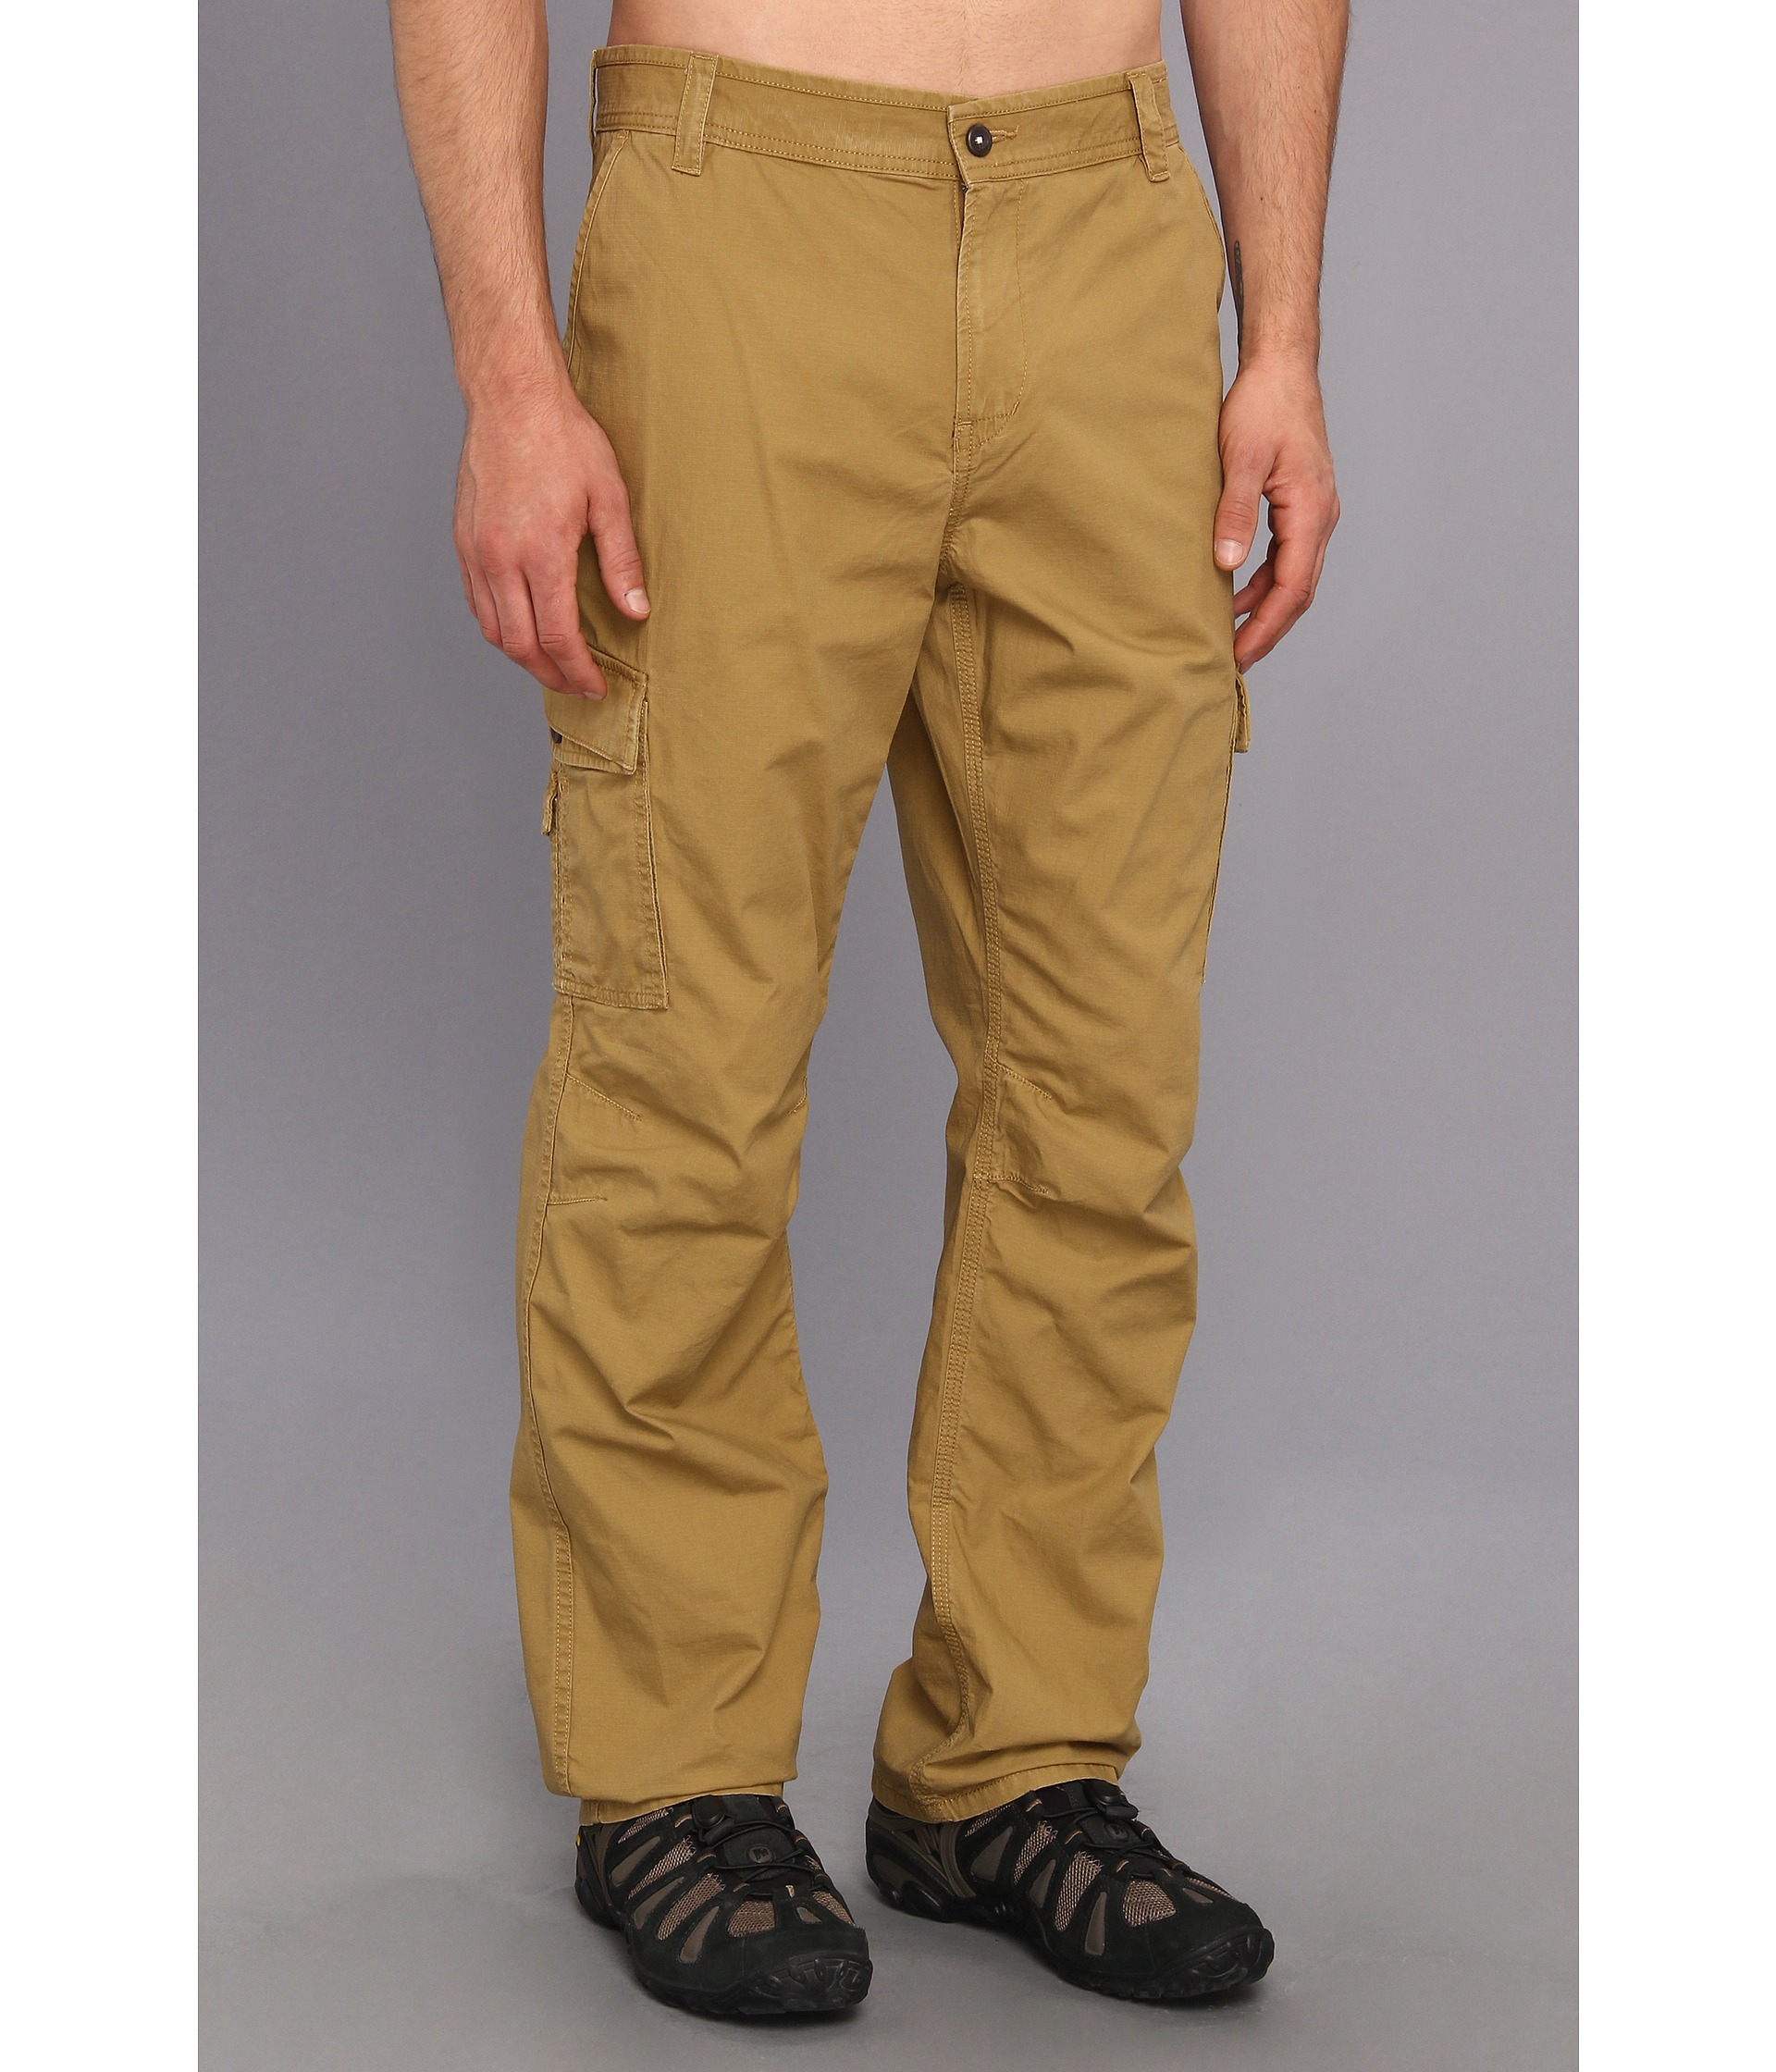 The North Face Arroyo Cargo Pant in British Khaki (Natural) for Men - Lyst